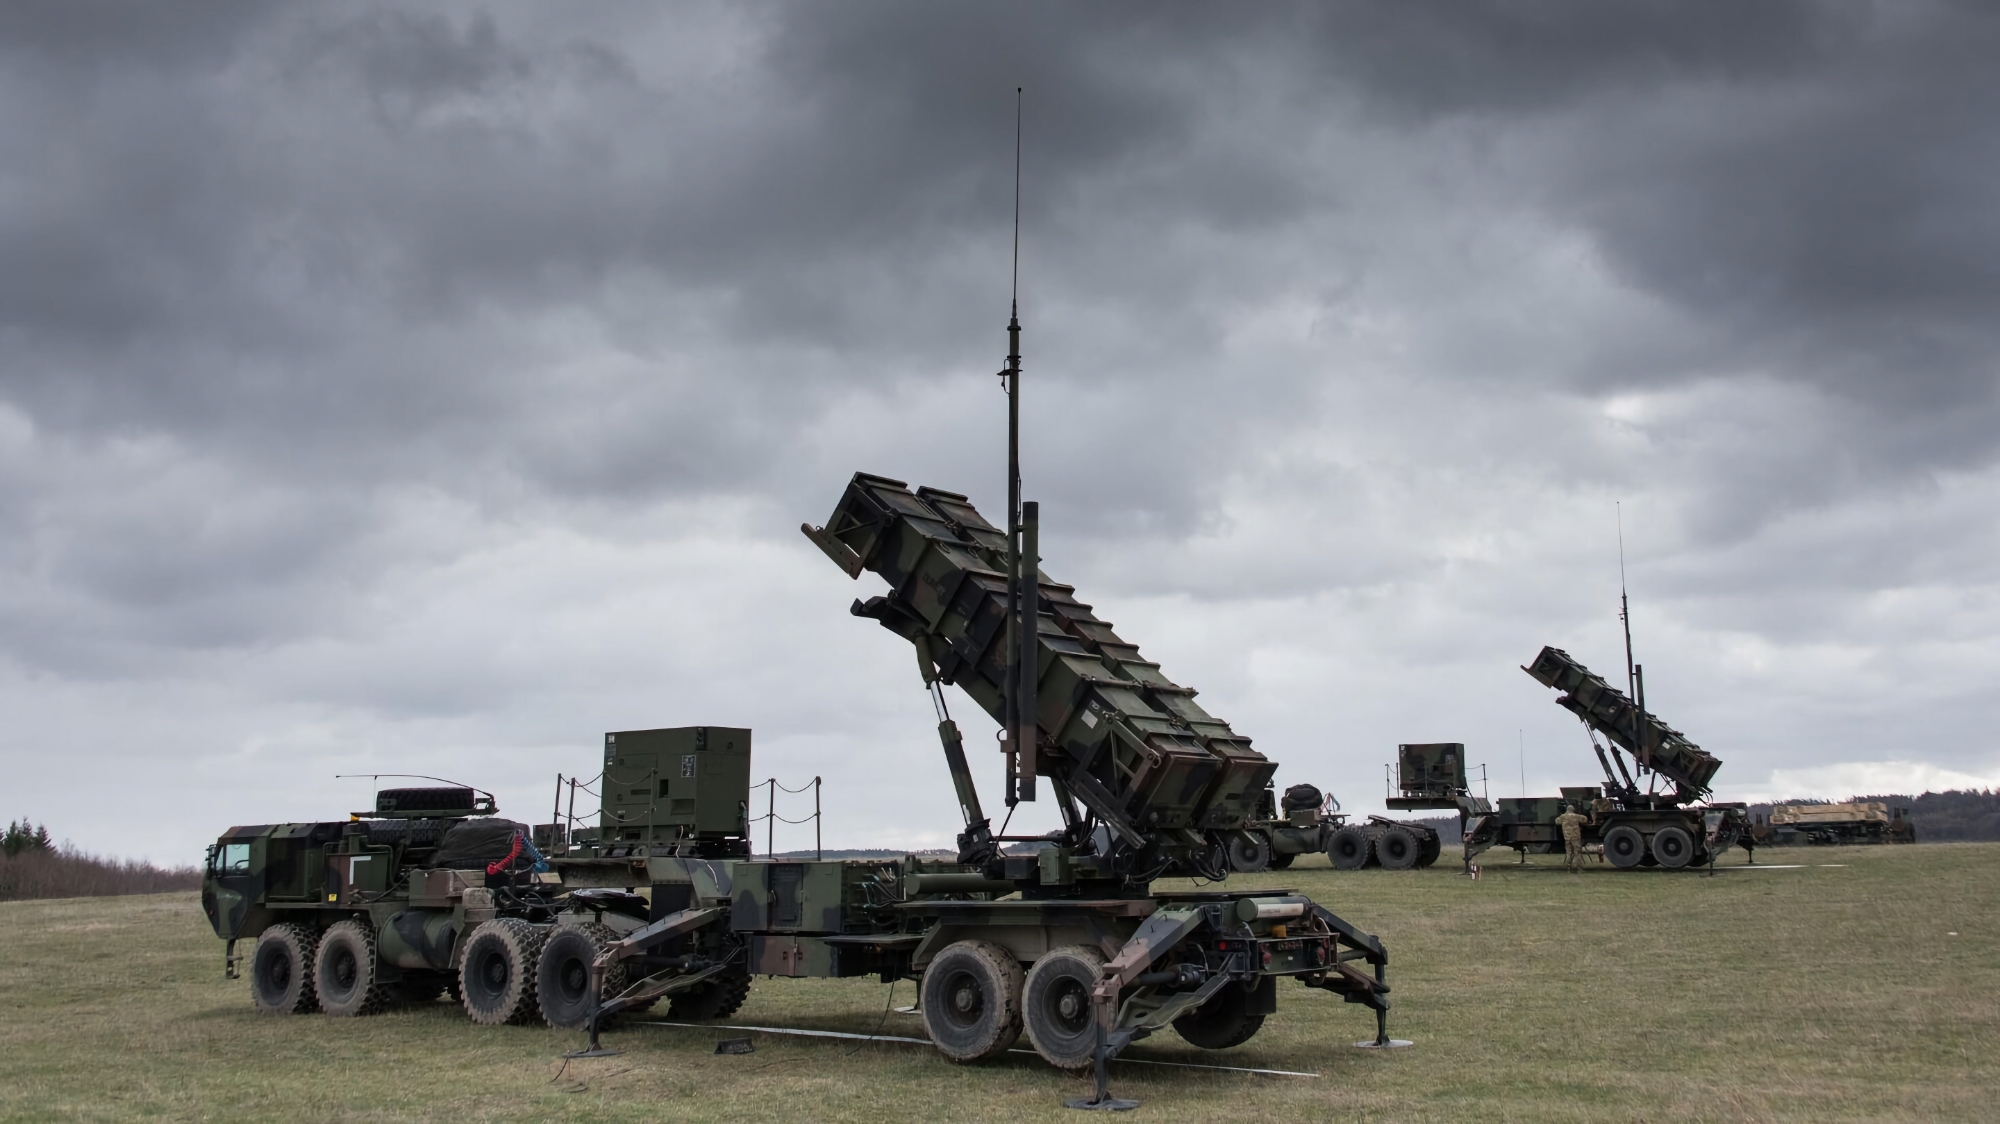 When will the Netherlands hand over the Patriot air defence system to Ukarine?